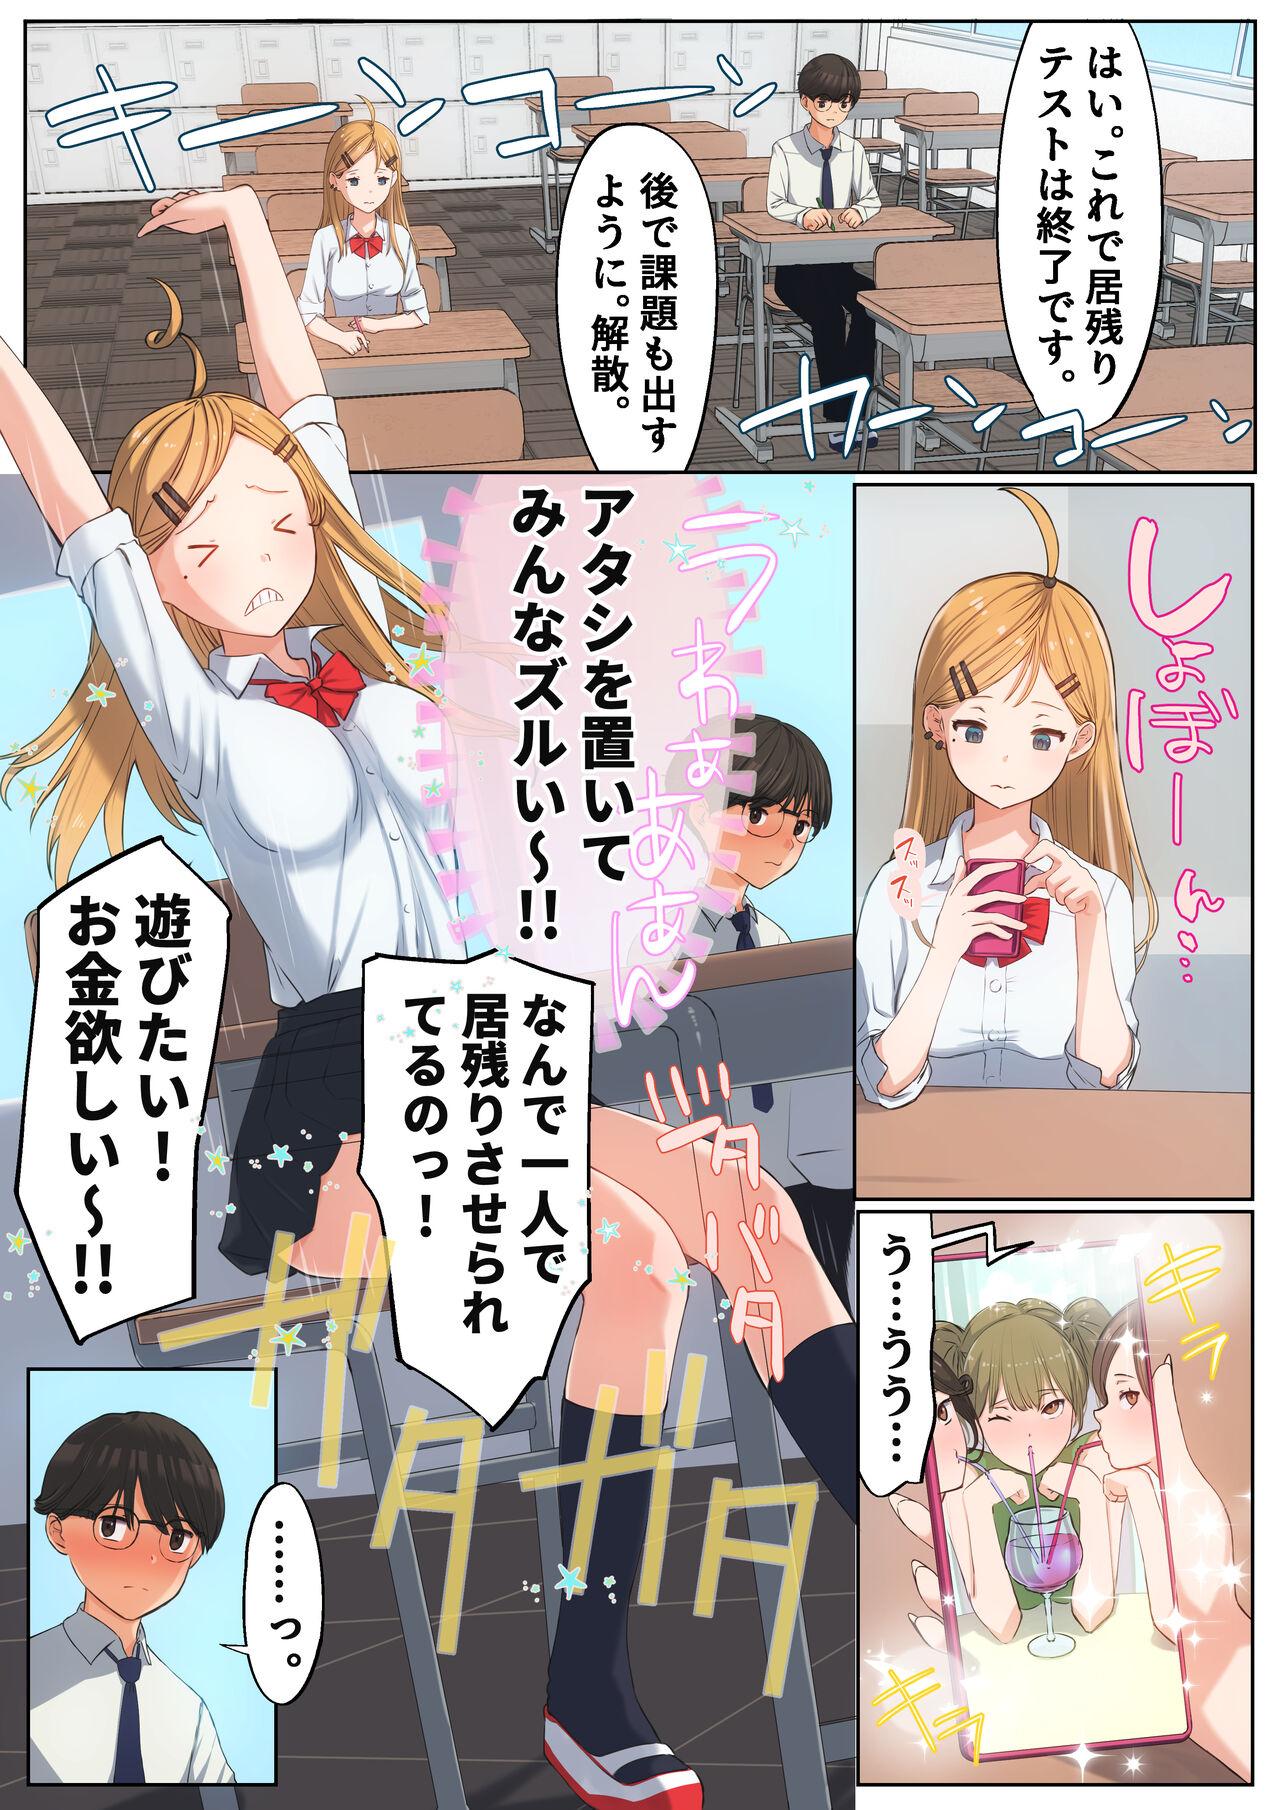 Gay College クラスメイトのギャルと始めるハメ撮りバイ - Original Point Of View - Page 2